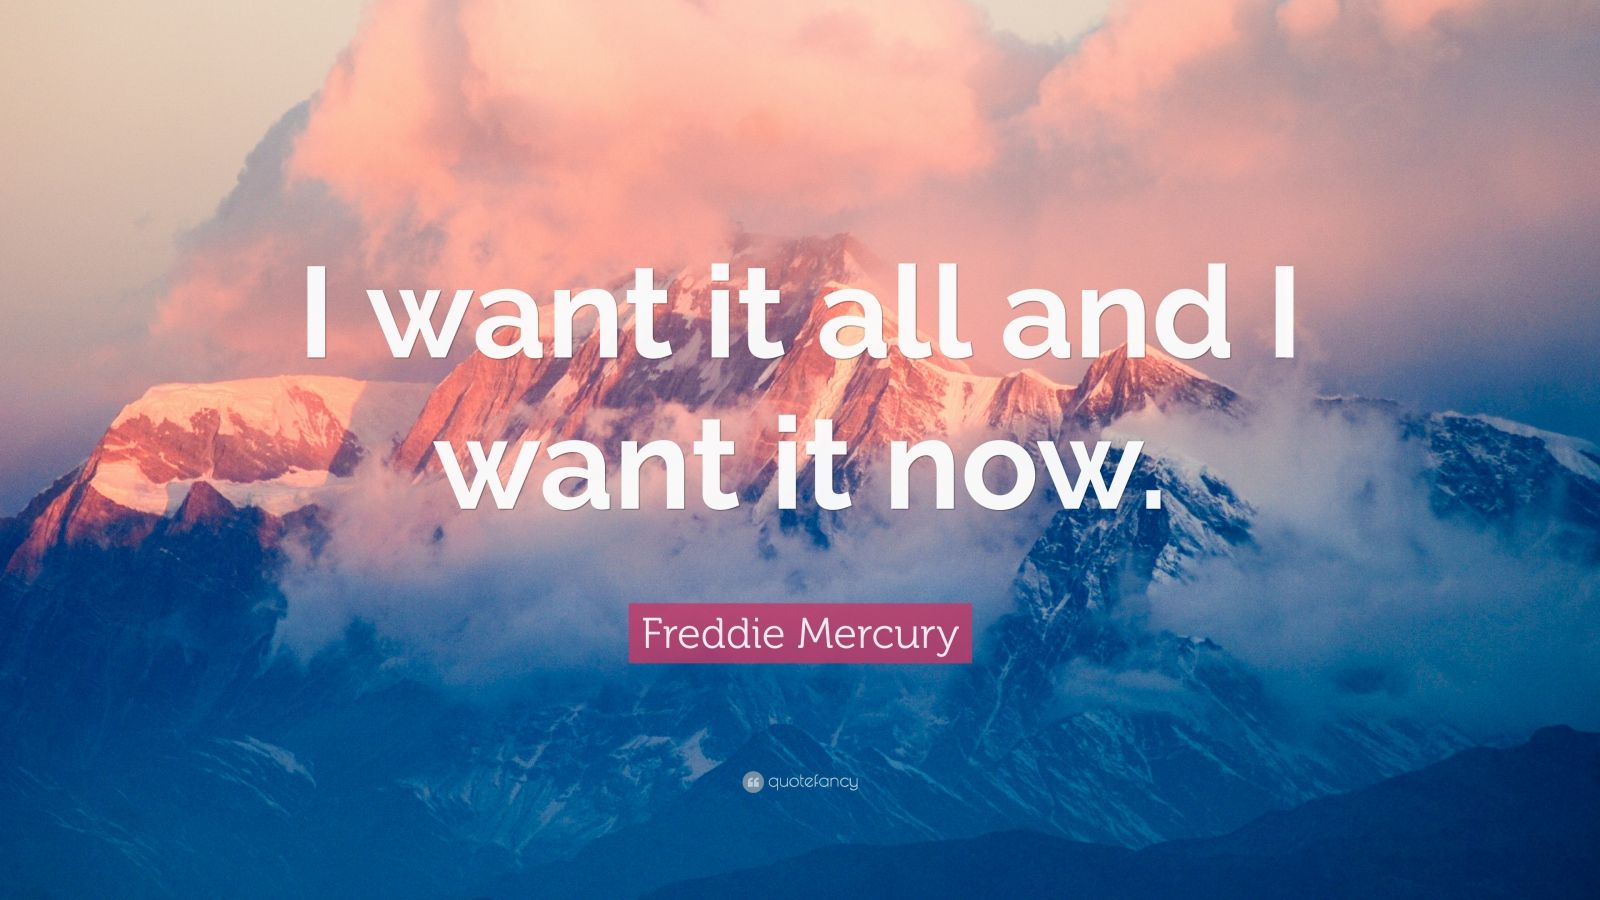 Freddie Mercury Quote: “I want it all and I want it now.” (12 ...